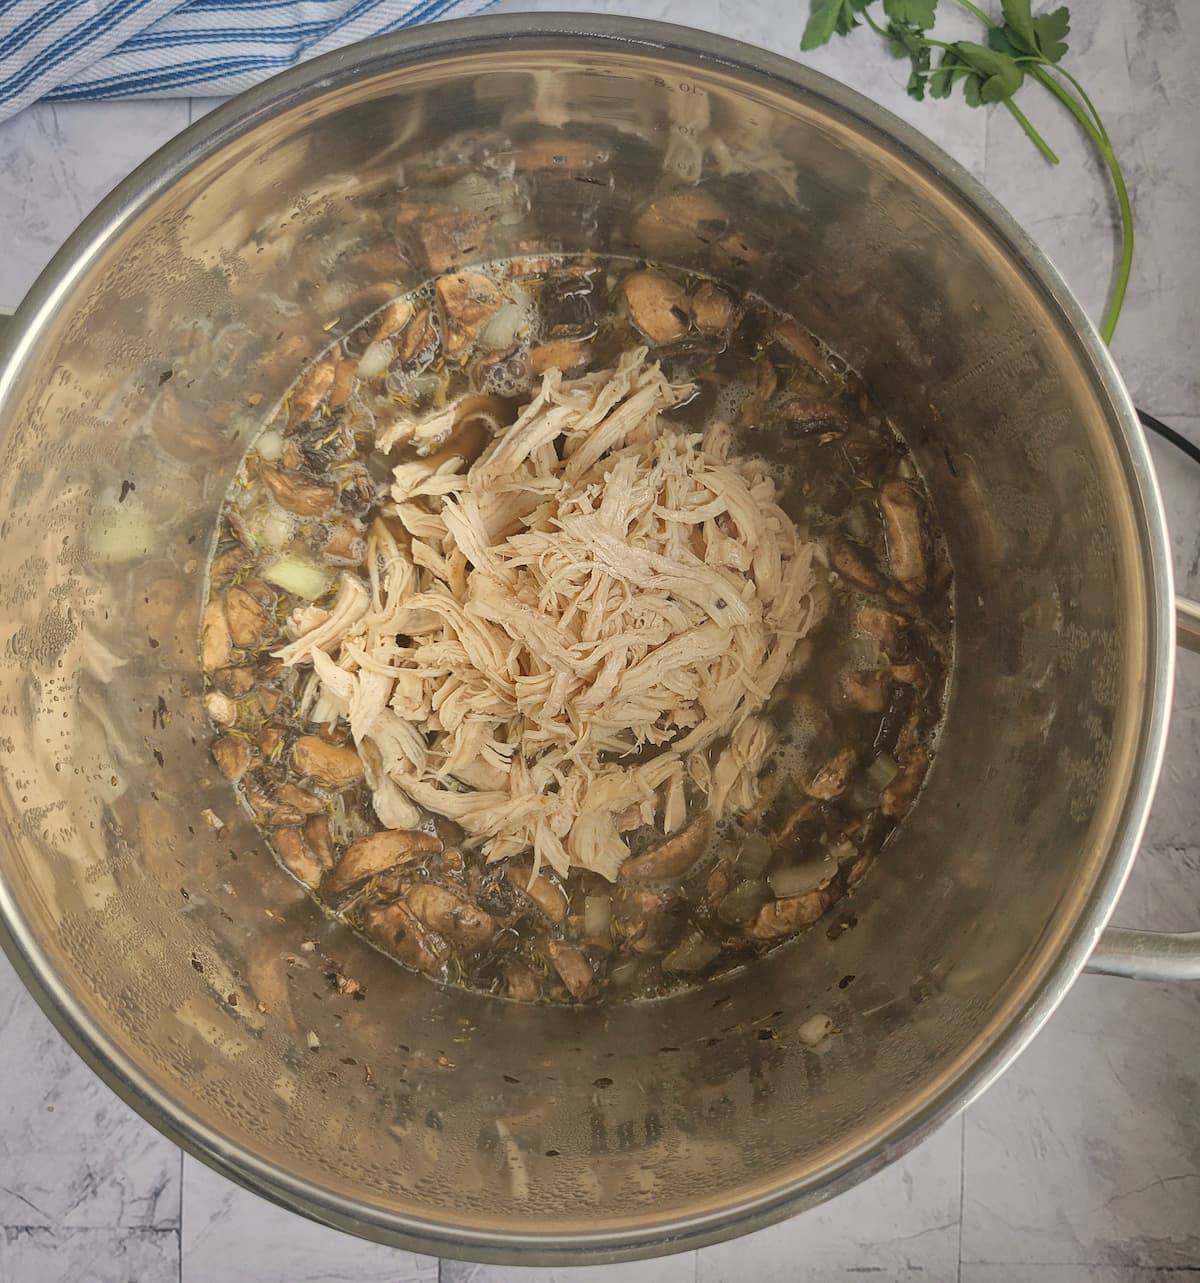 shredded chicken in a large pot with broth, sliced mushrooms, onions and spices